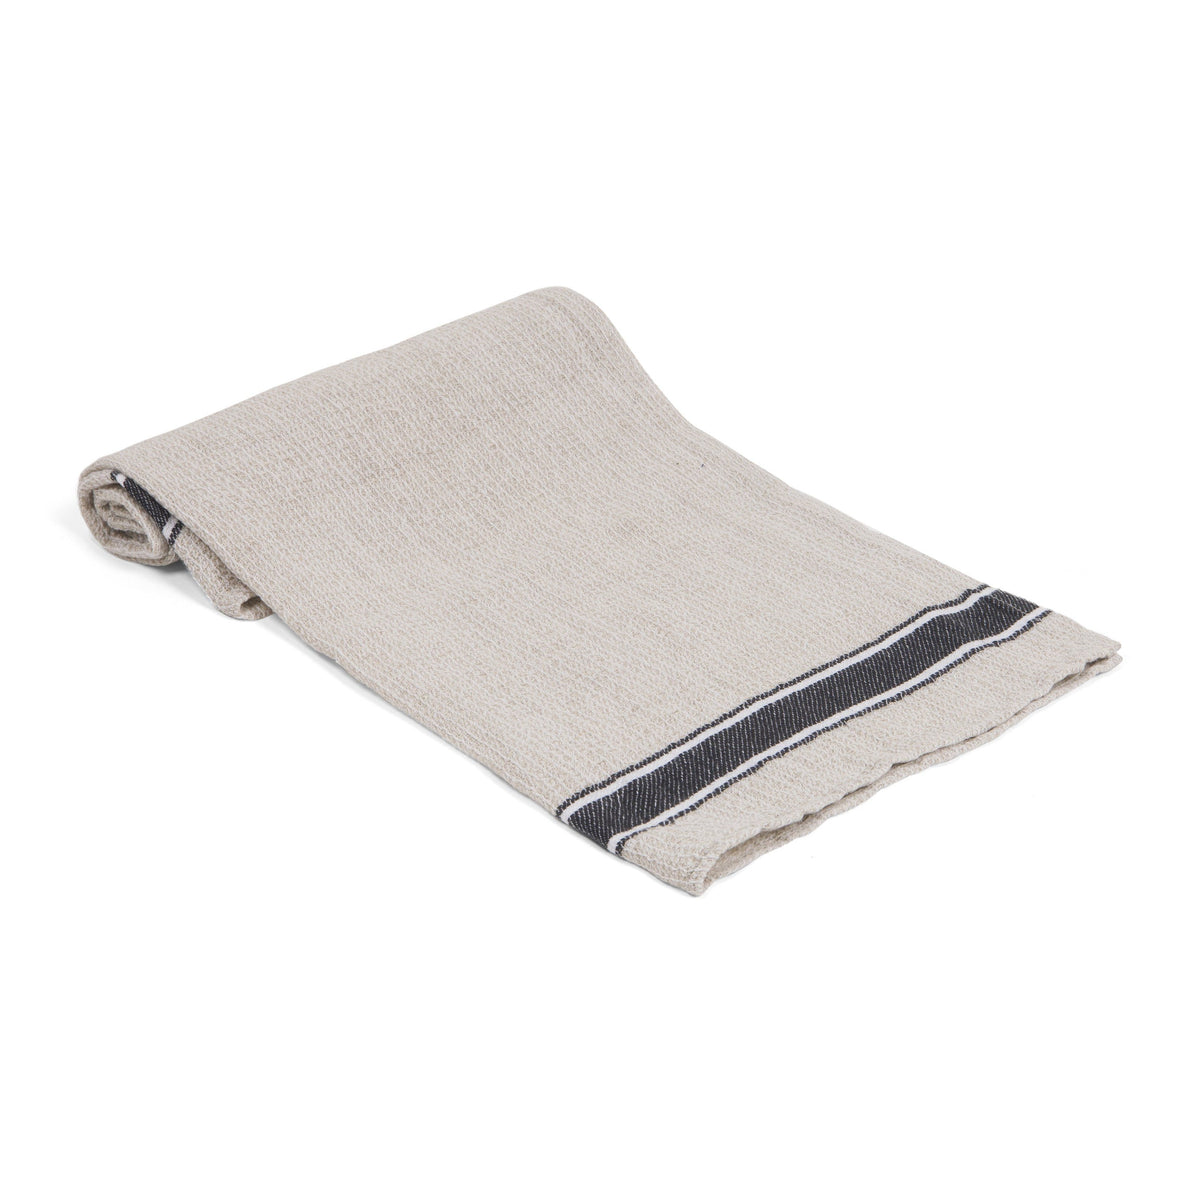 Rustic Sonoma Linen Kitchen Towel - Olive and Linen